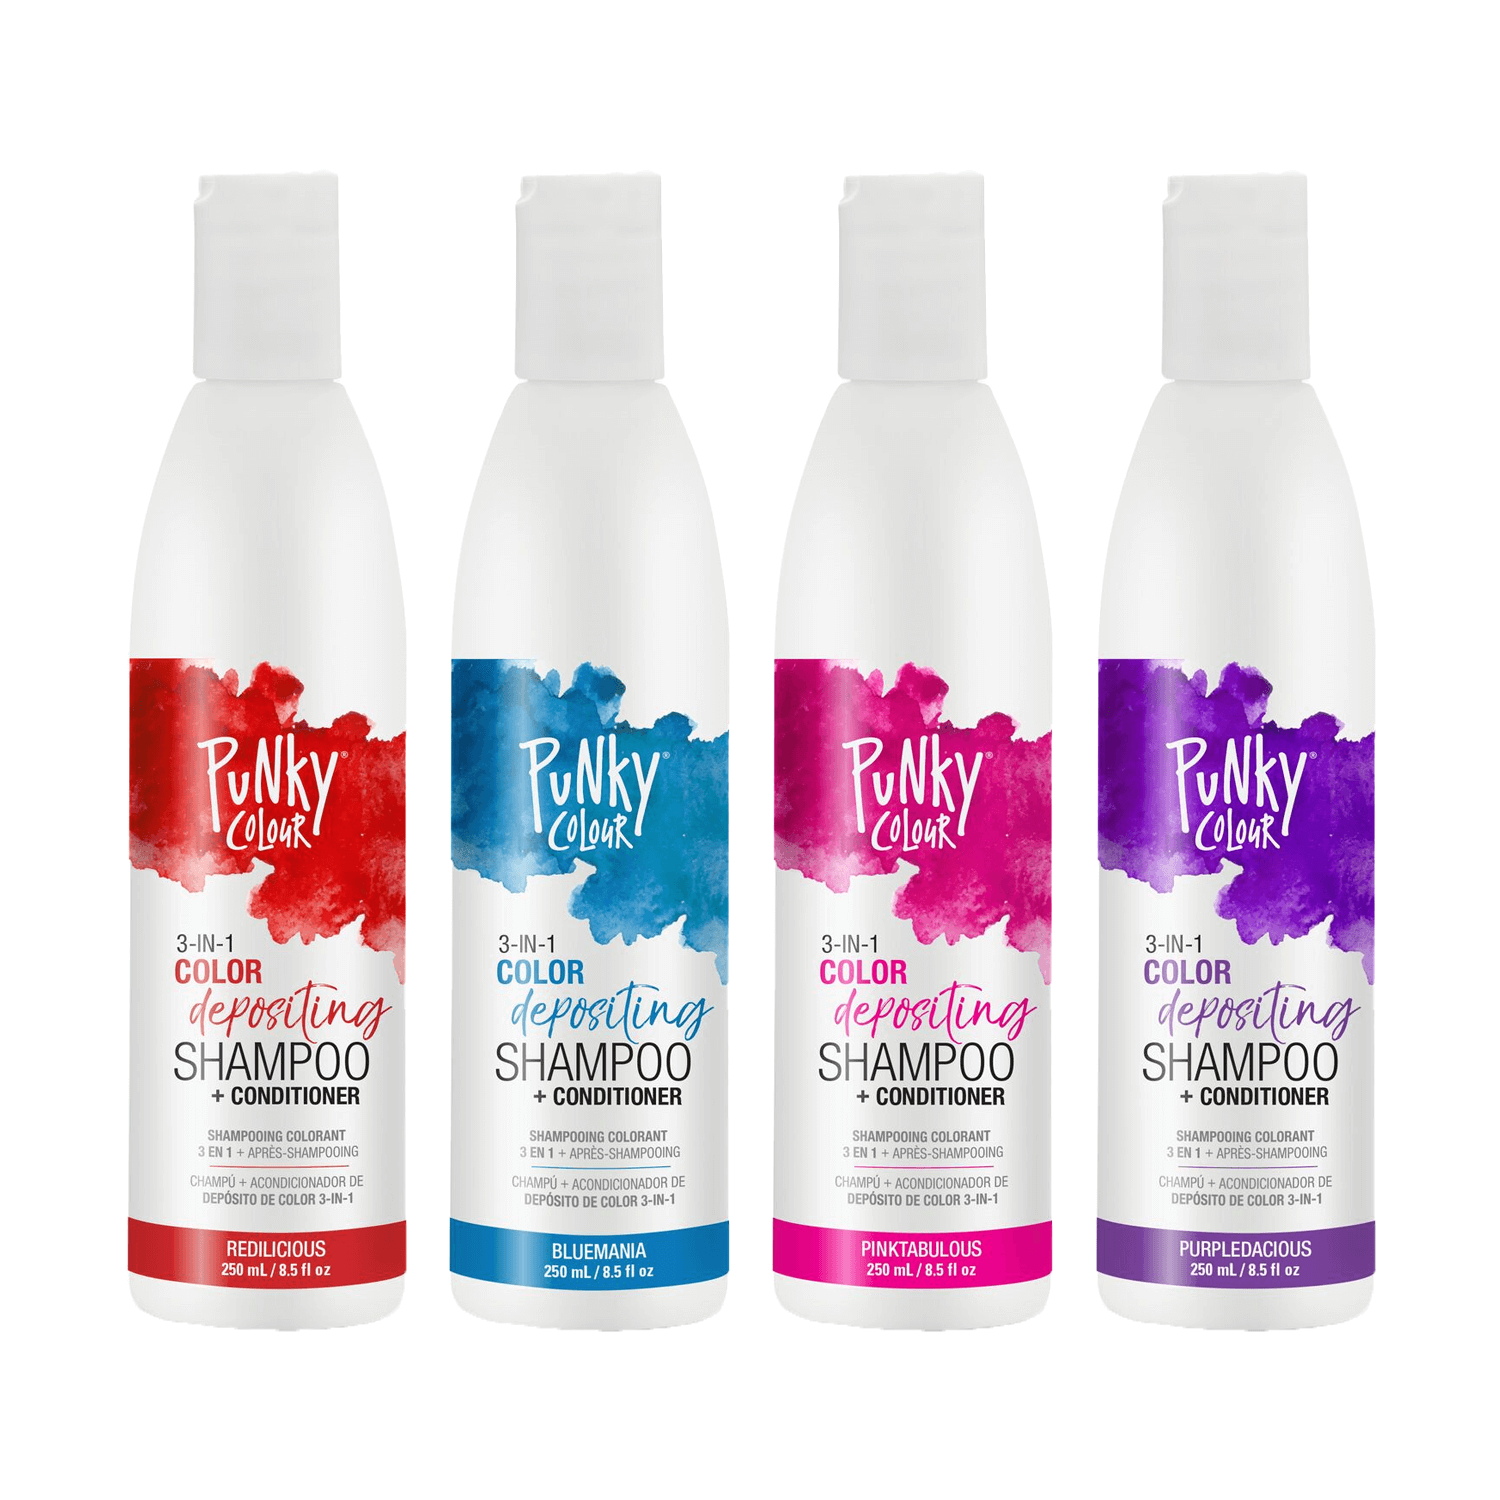 3 In 1 Color Depositing Shampoo & Conditioner by Punky Colour